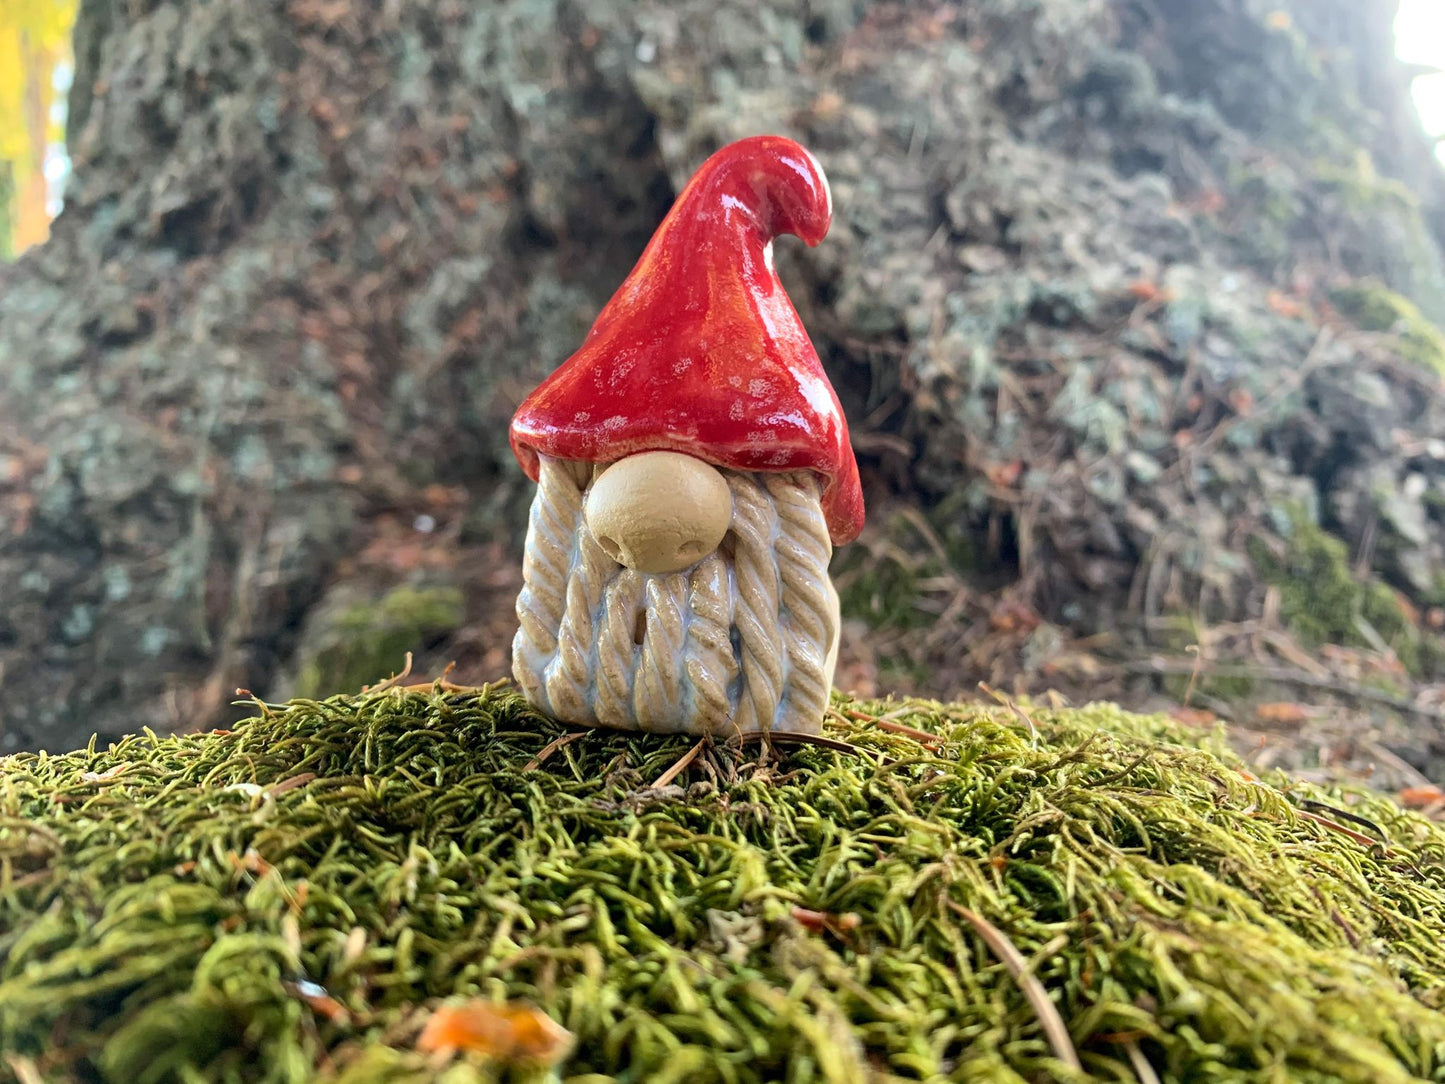 Wally the Gnome